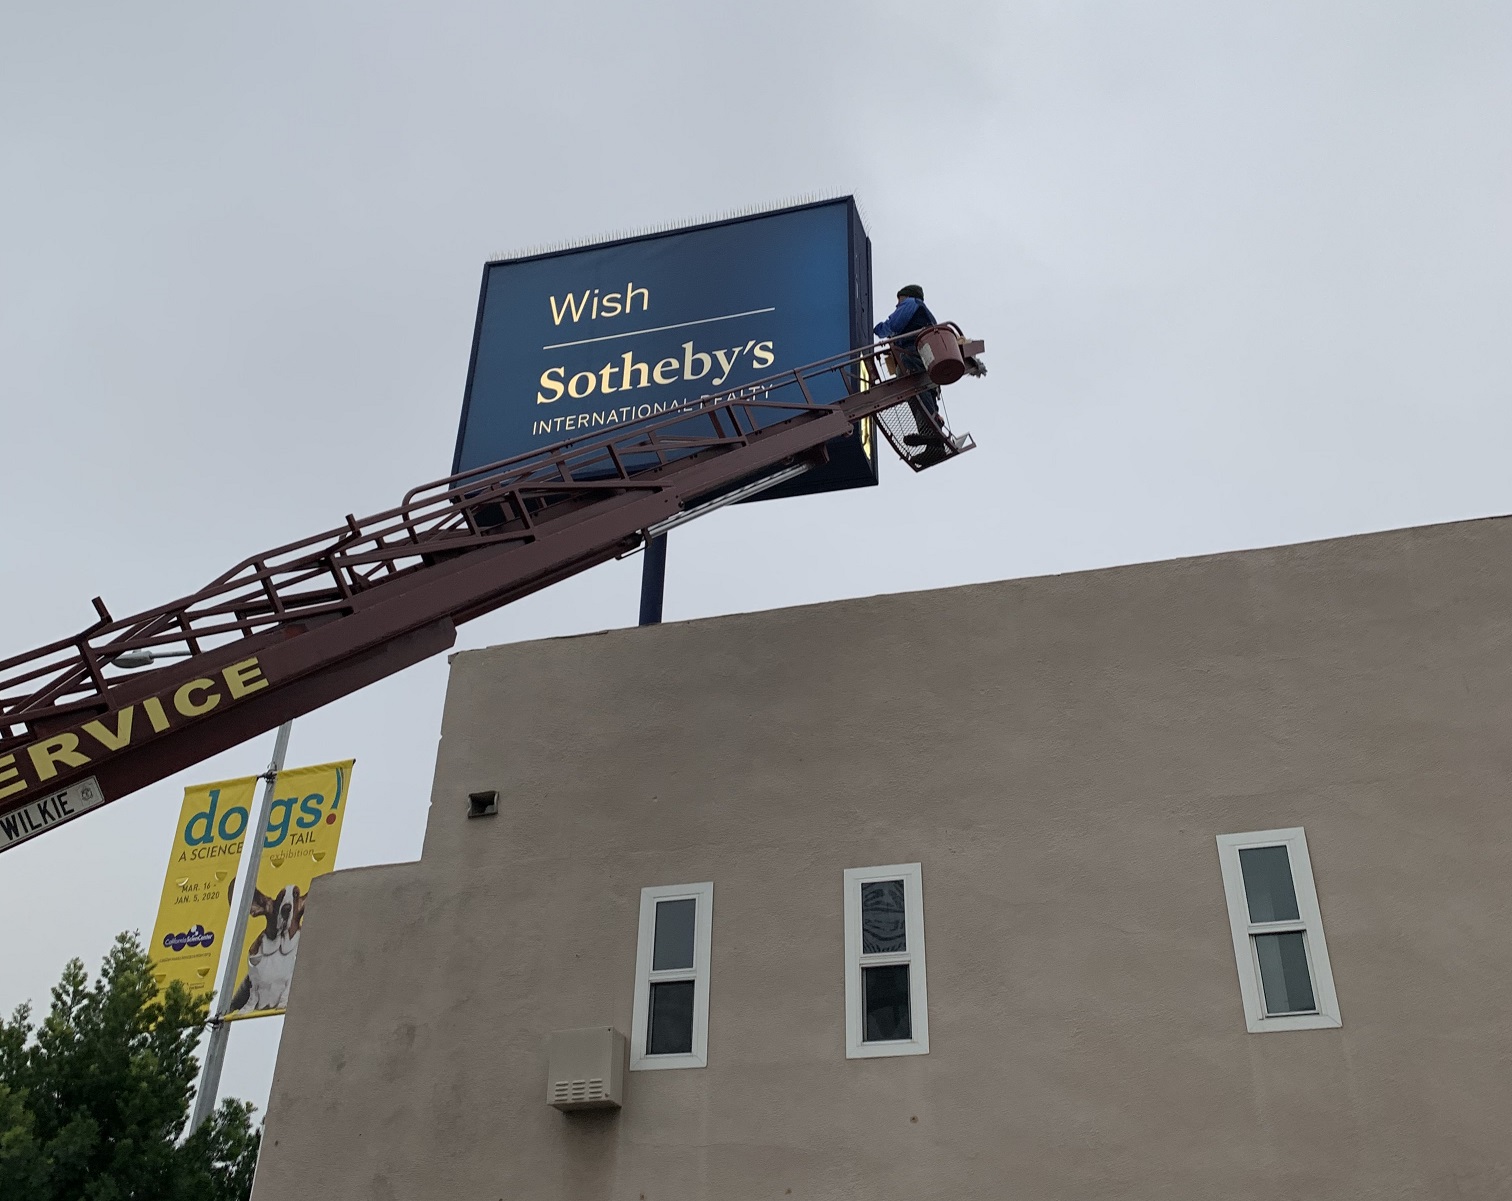 You are currently viewing Pylon Sign Repair for Wish Sotheby in Toluca Lake